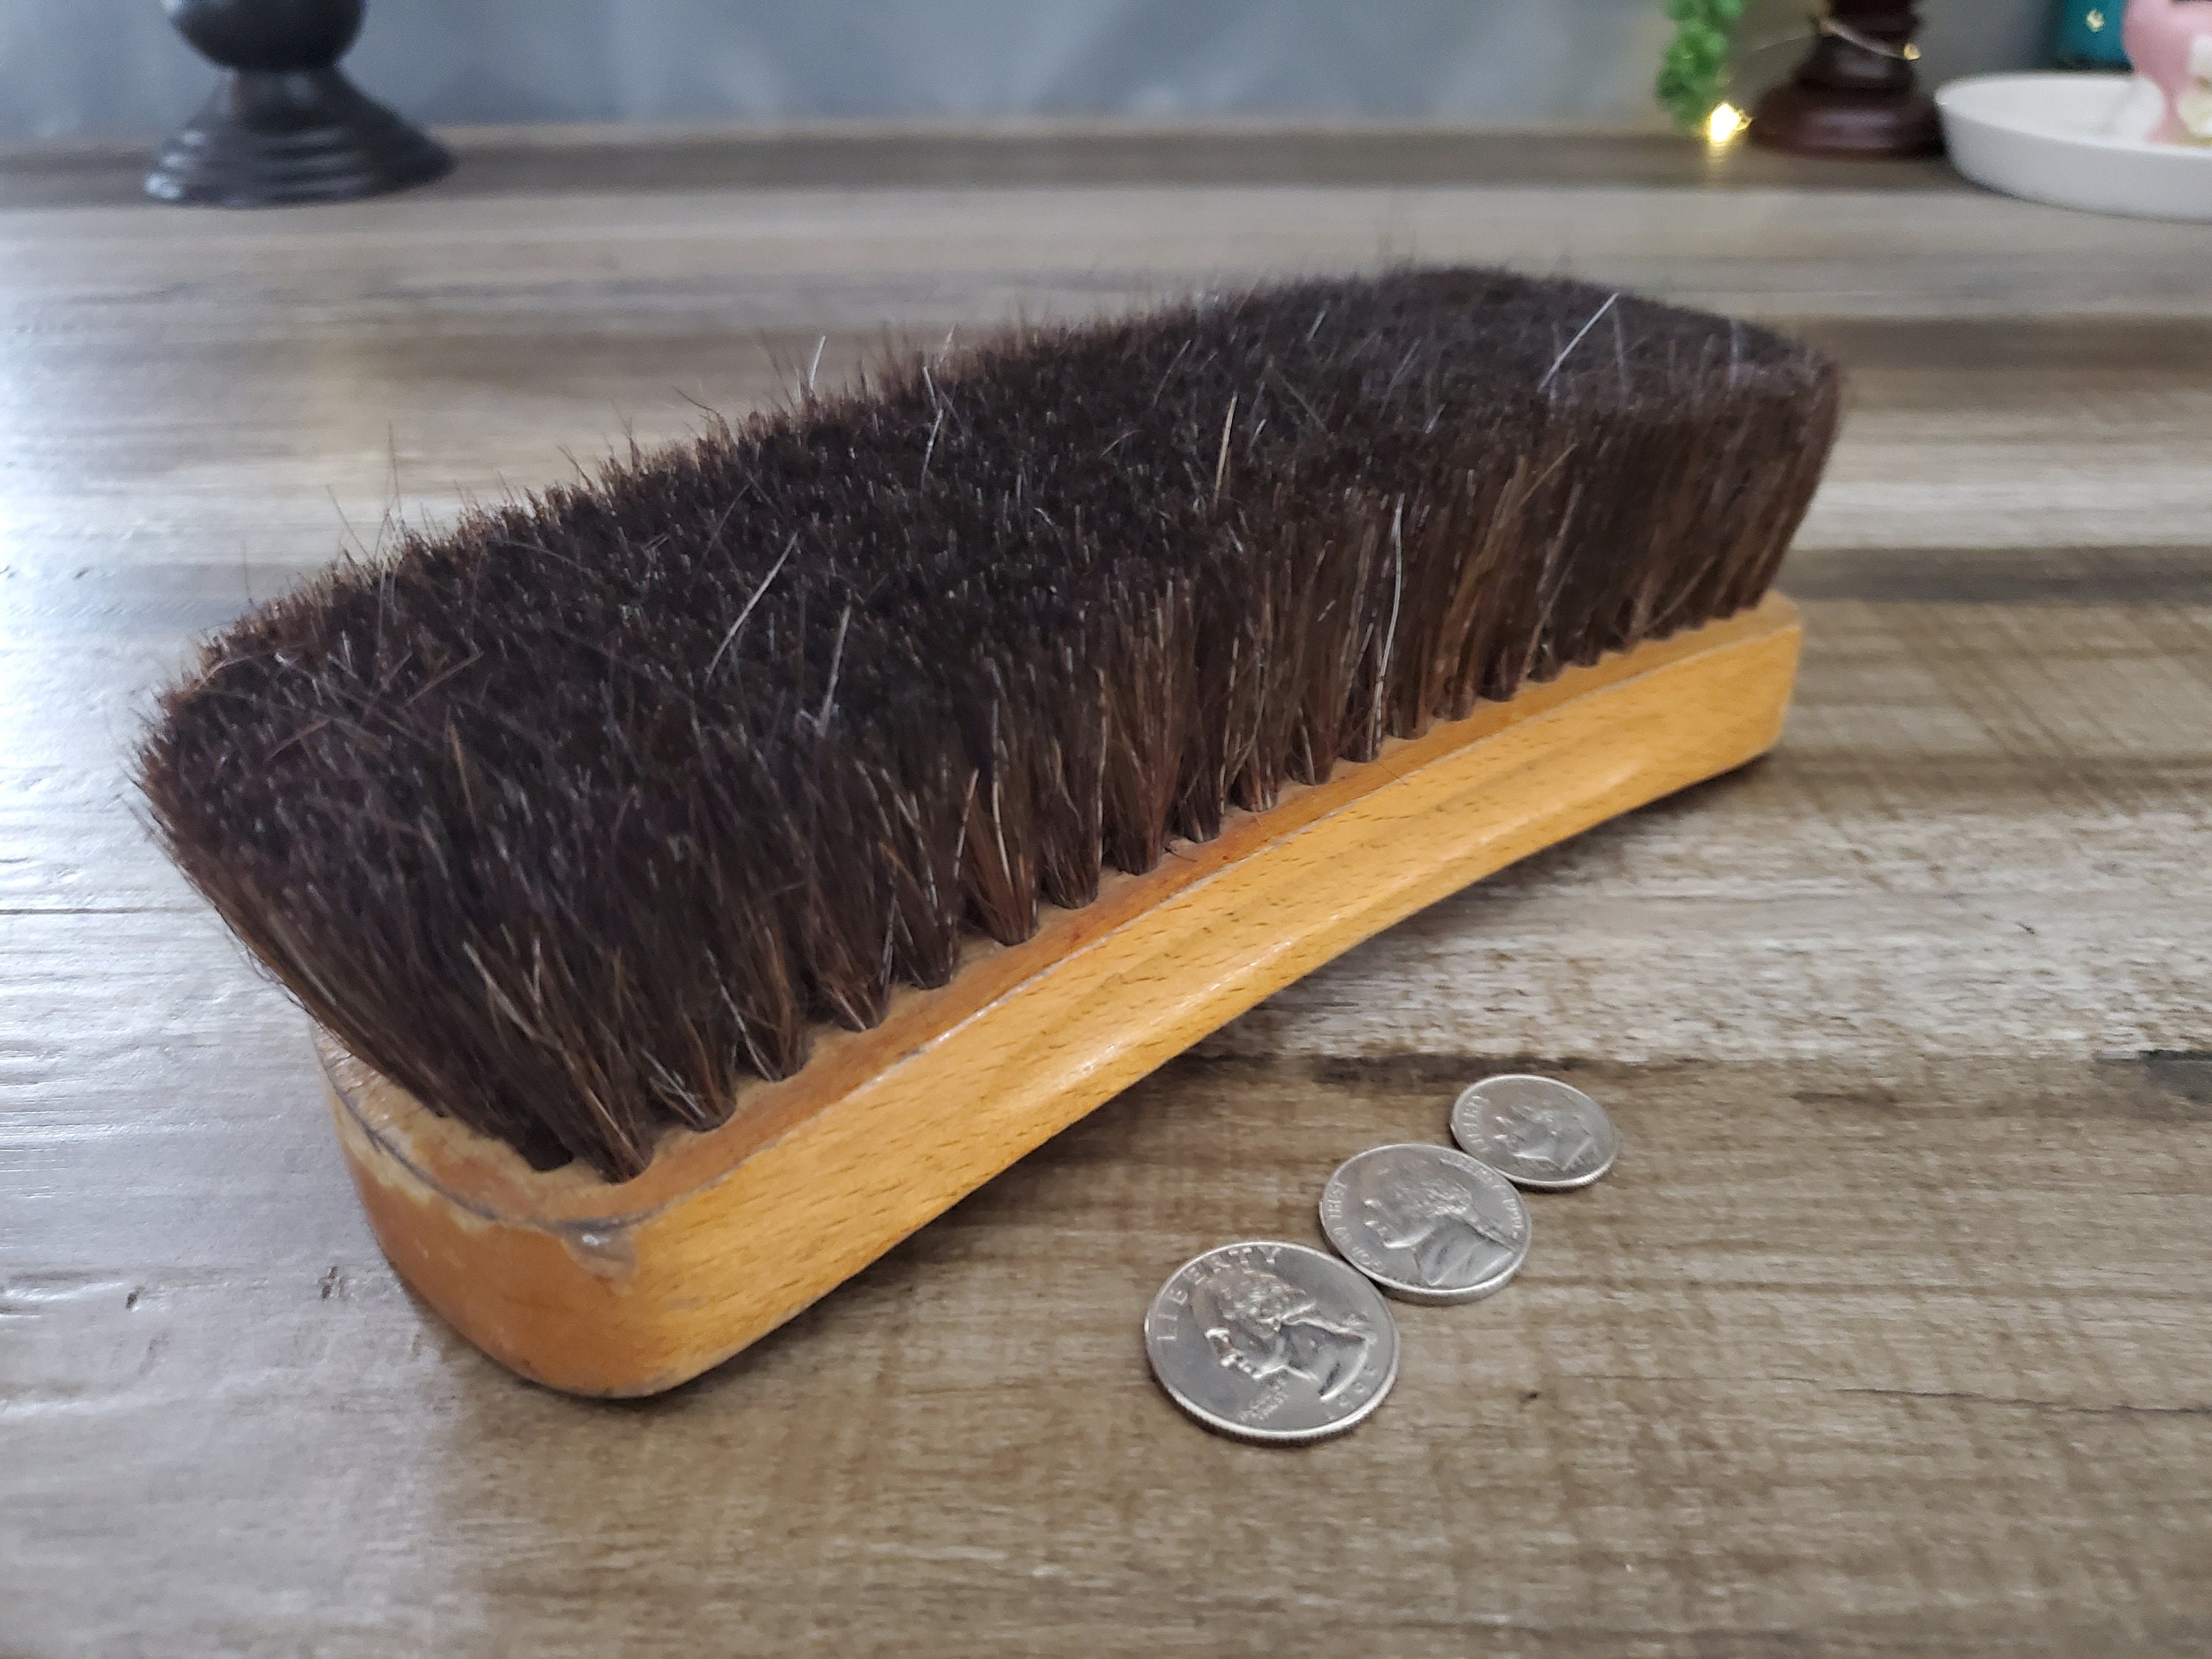 FIVE STAR Shoe Brush by Military Outfitters Inc Wood | Etsy